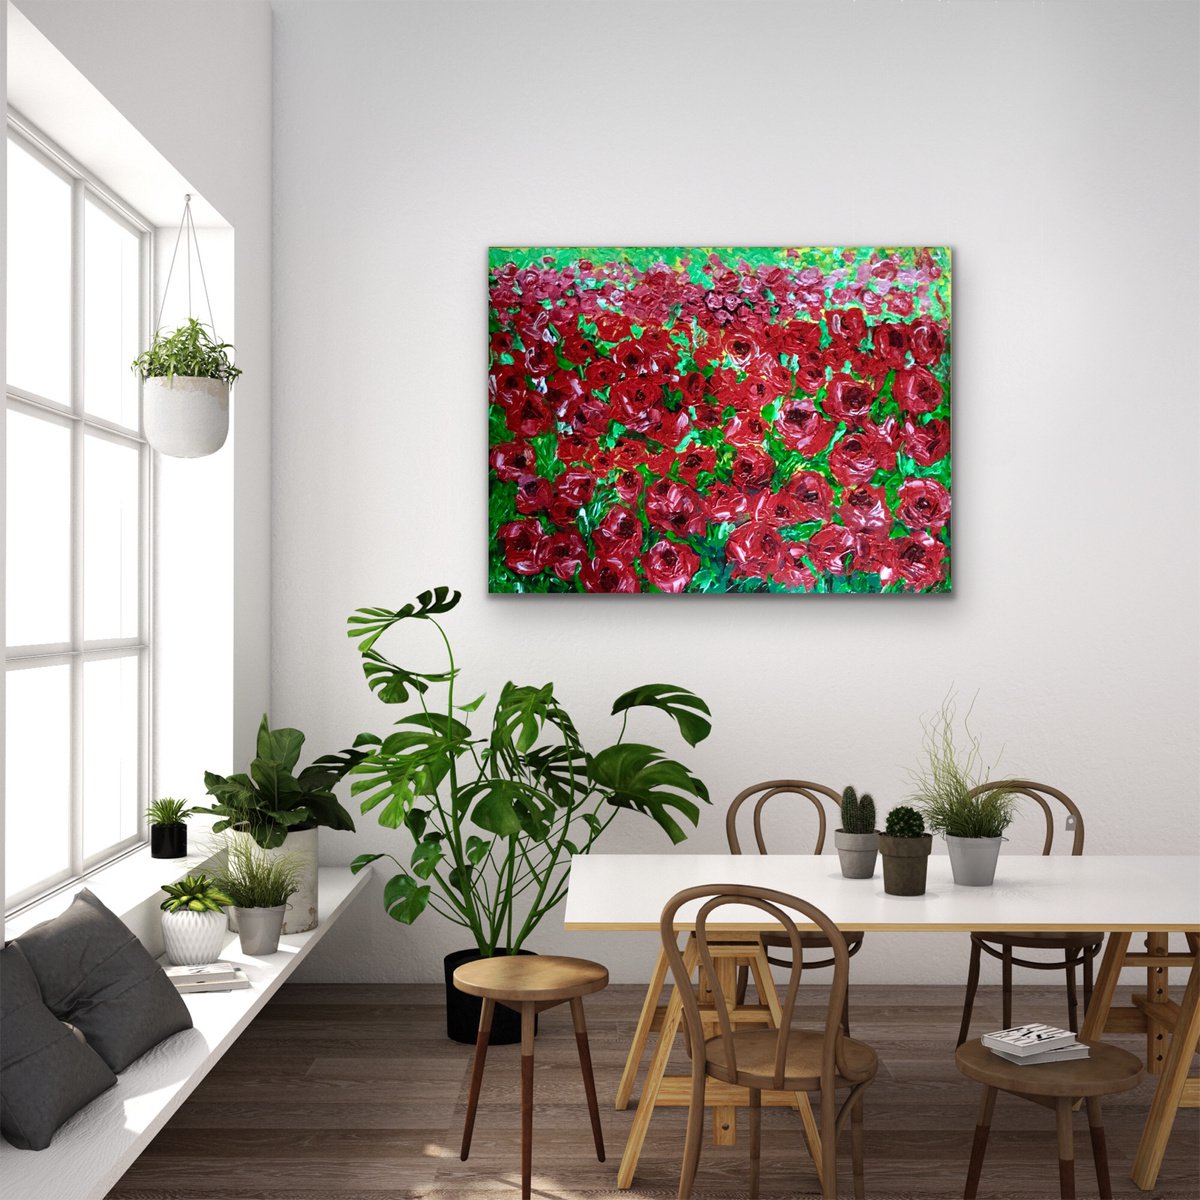 FIELD OF RED ROSES, MEADOW OF FLOWERS, large size painting office home decor gift by Olga Koval